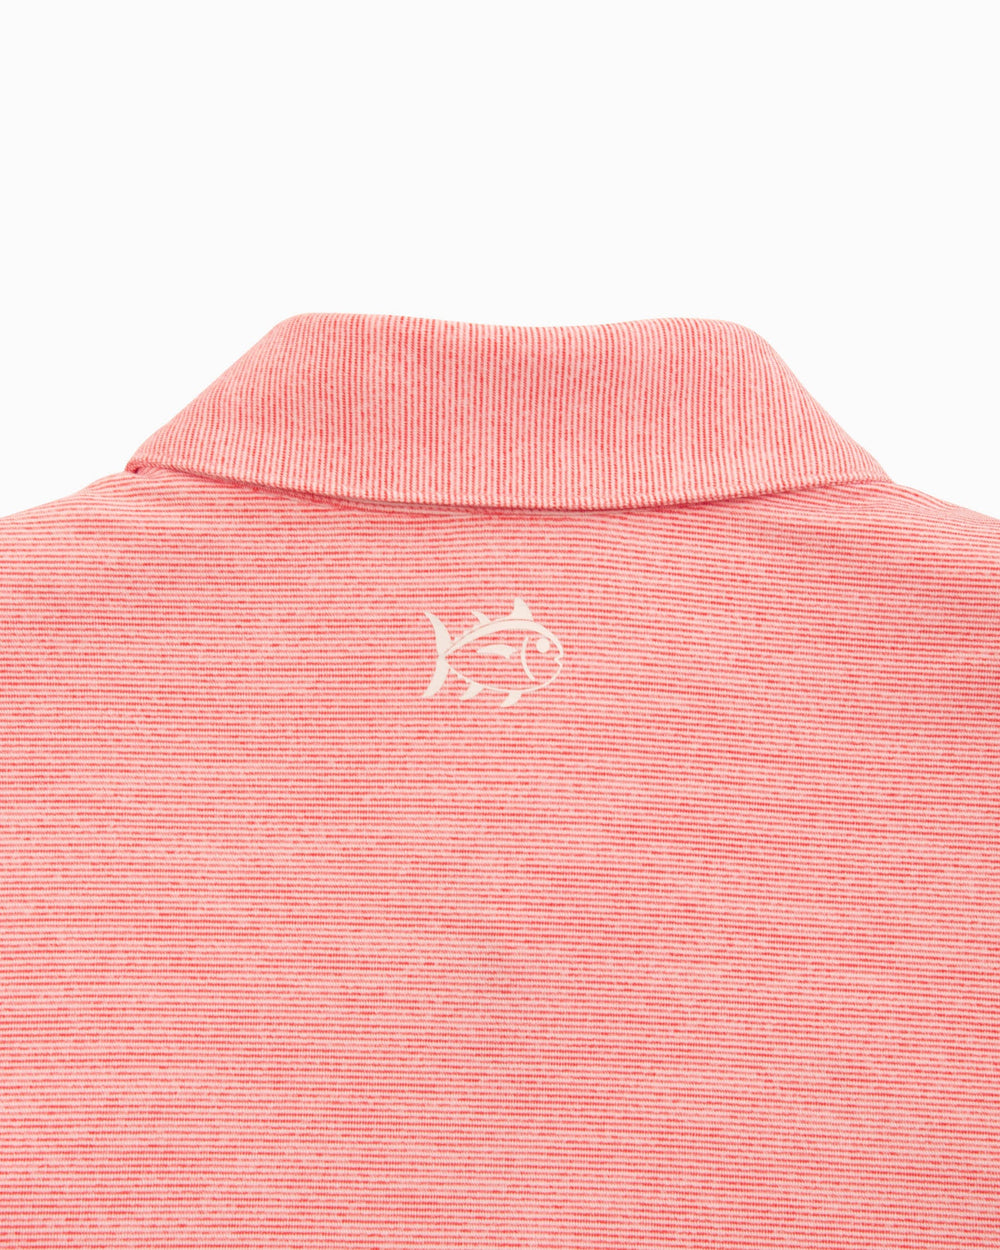 The yoke view of the Georgia Bulldogs Driver Spacedye Polo Shirt by Southern Tide - Varsity Red